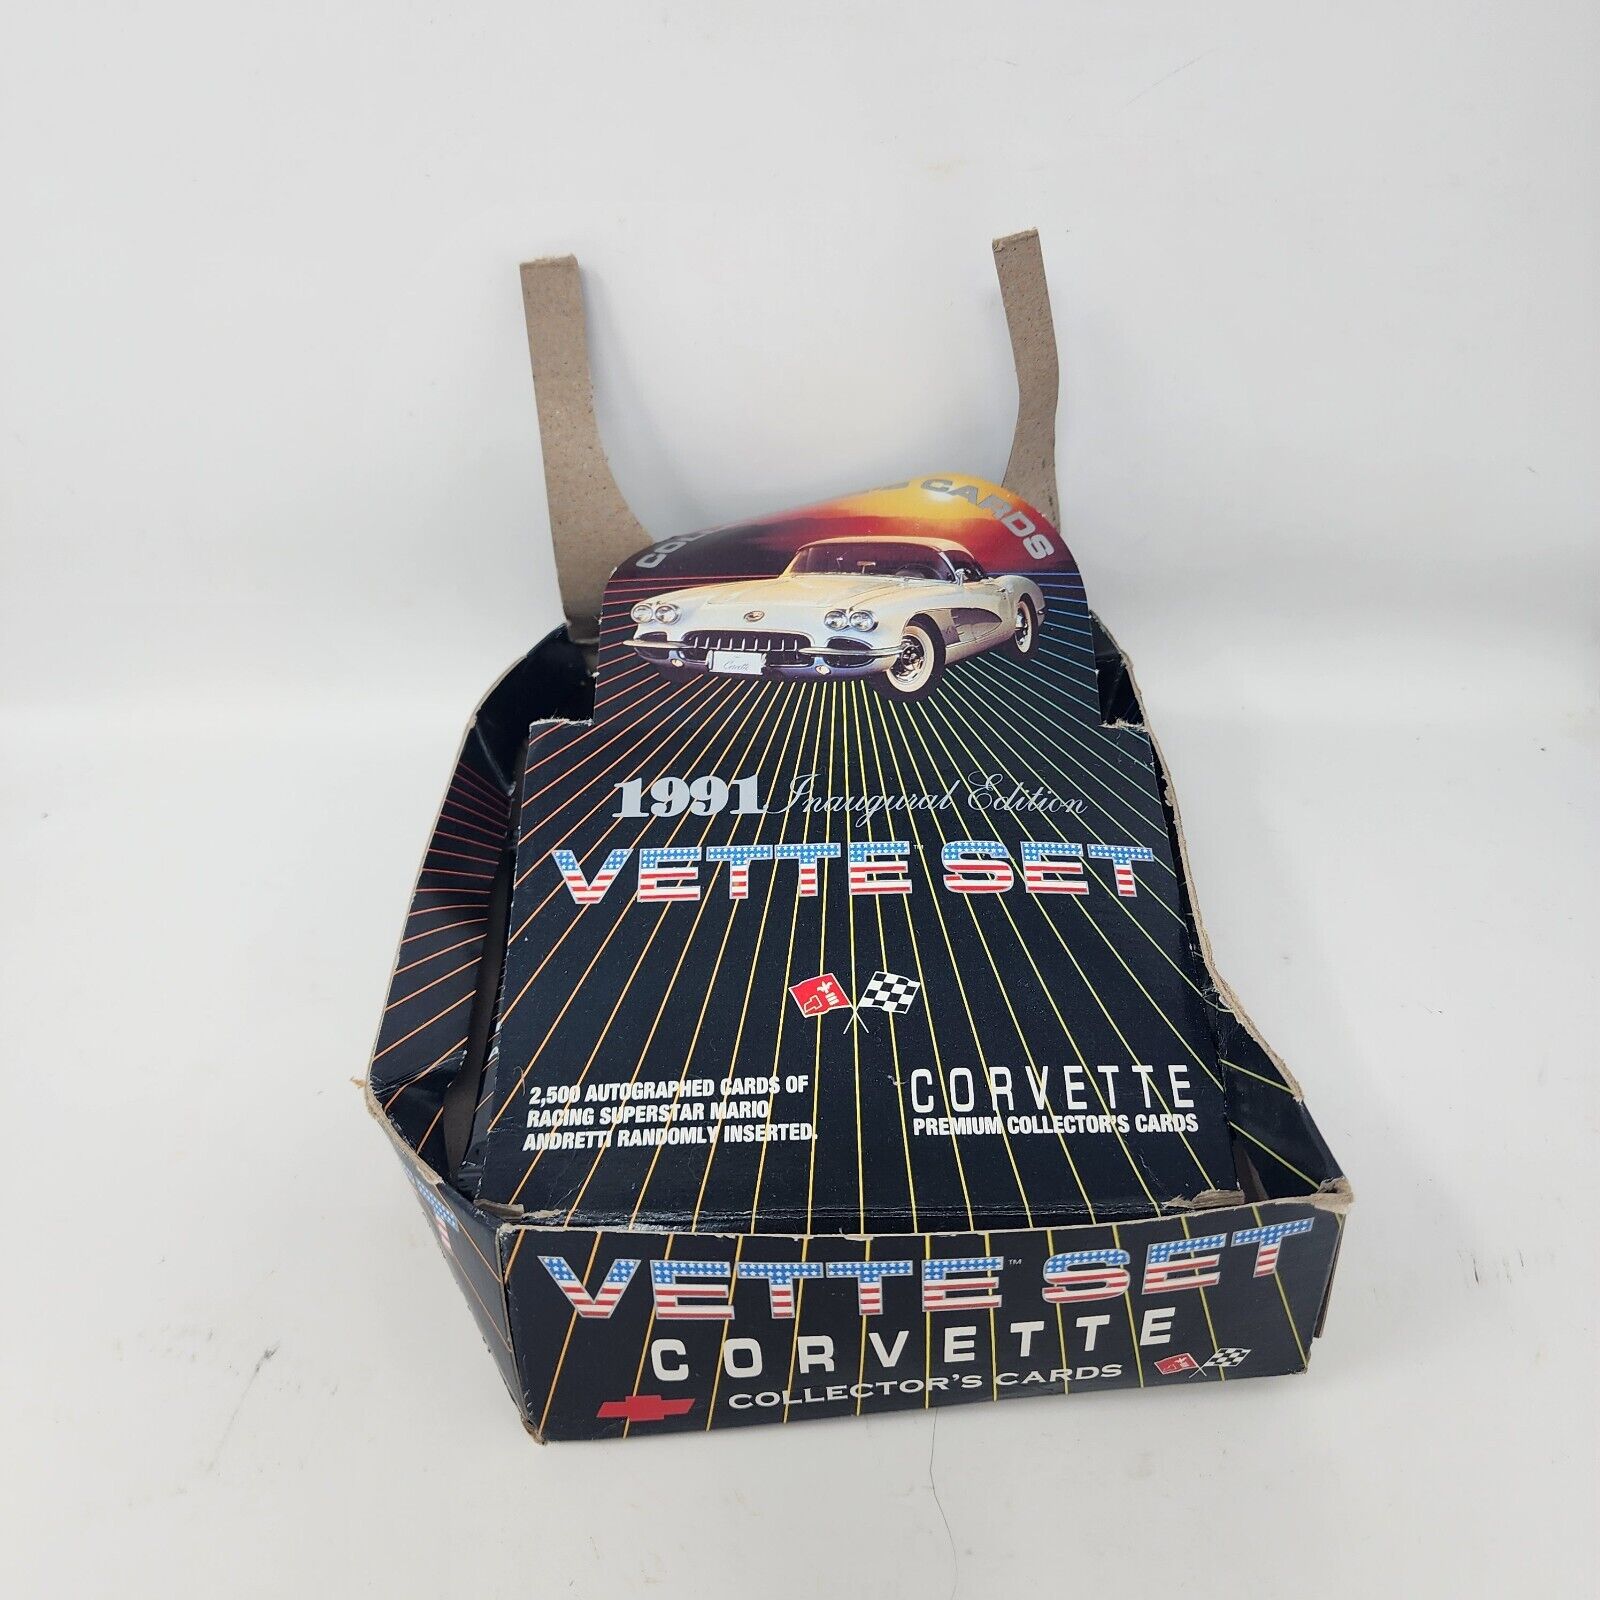 Collect-A-Card Corp. Corvette Collector's Cards Vette Set 22 Packs 1991